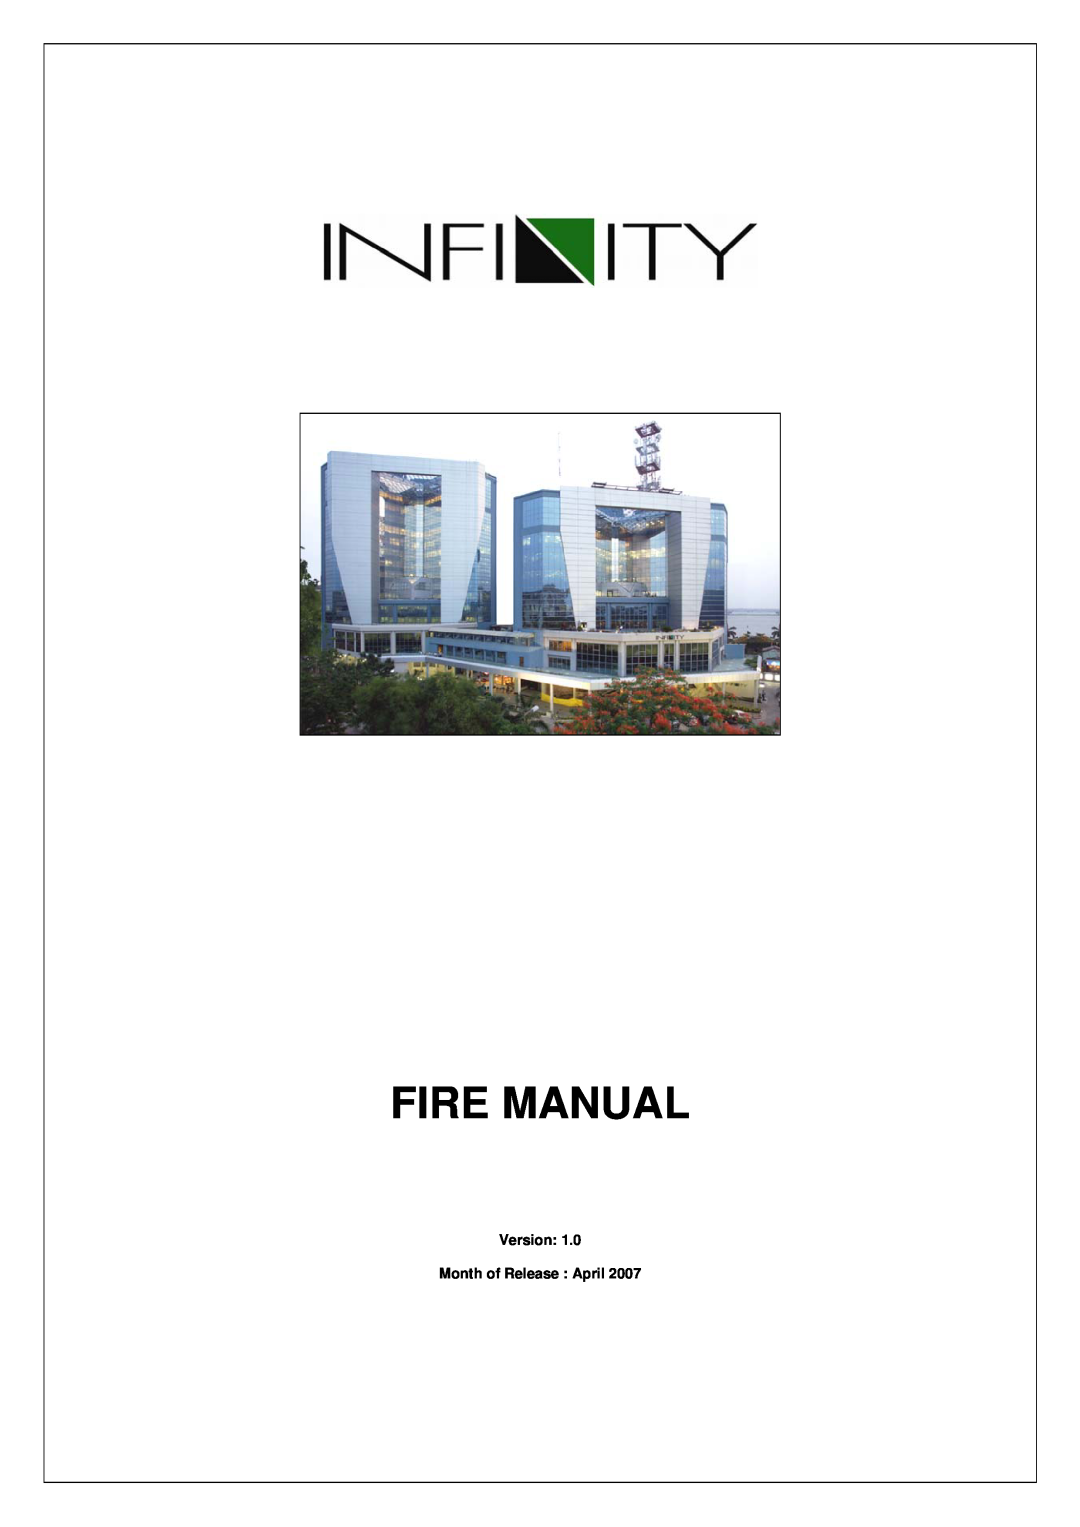 Magma 1 manual Fire Manual, Version Month of Release April 